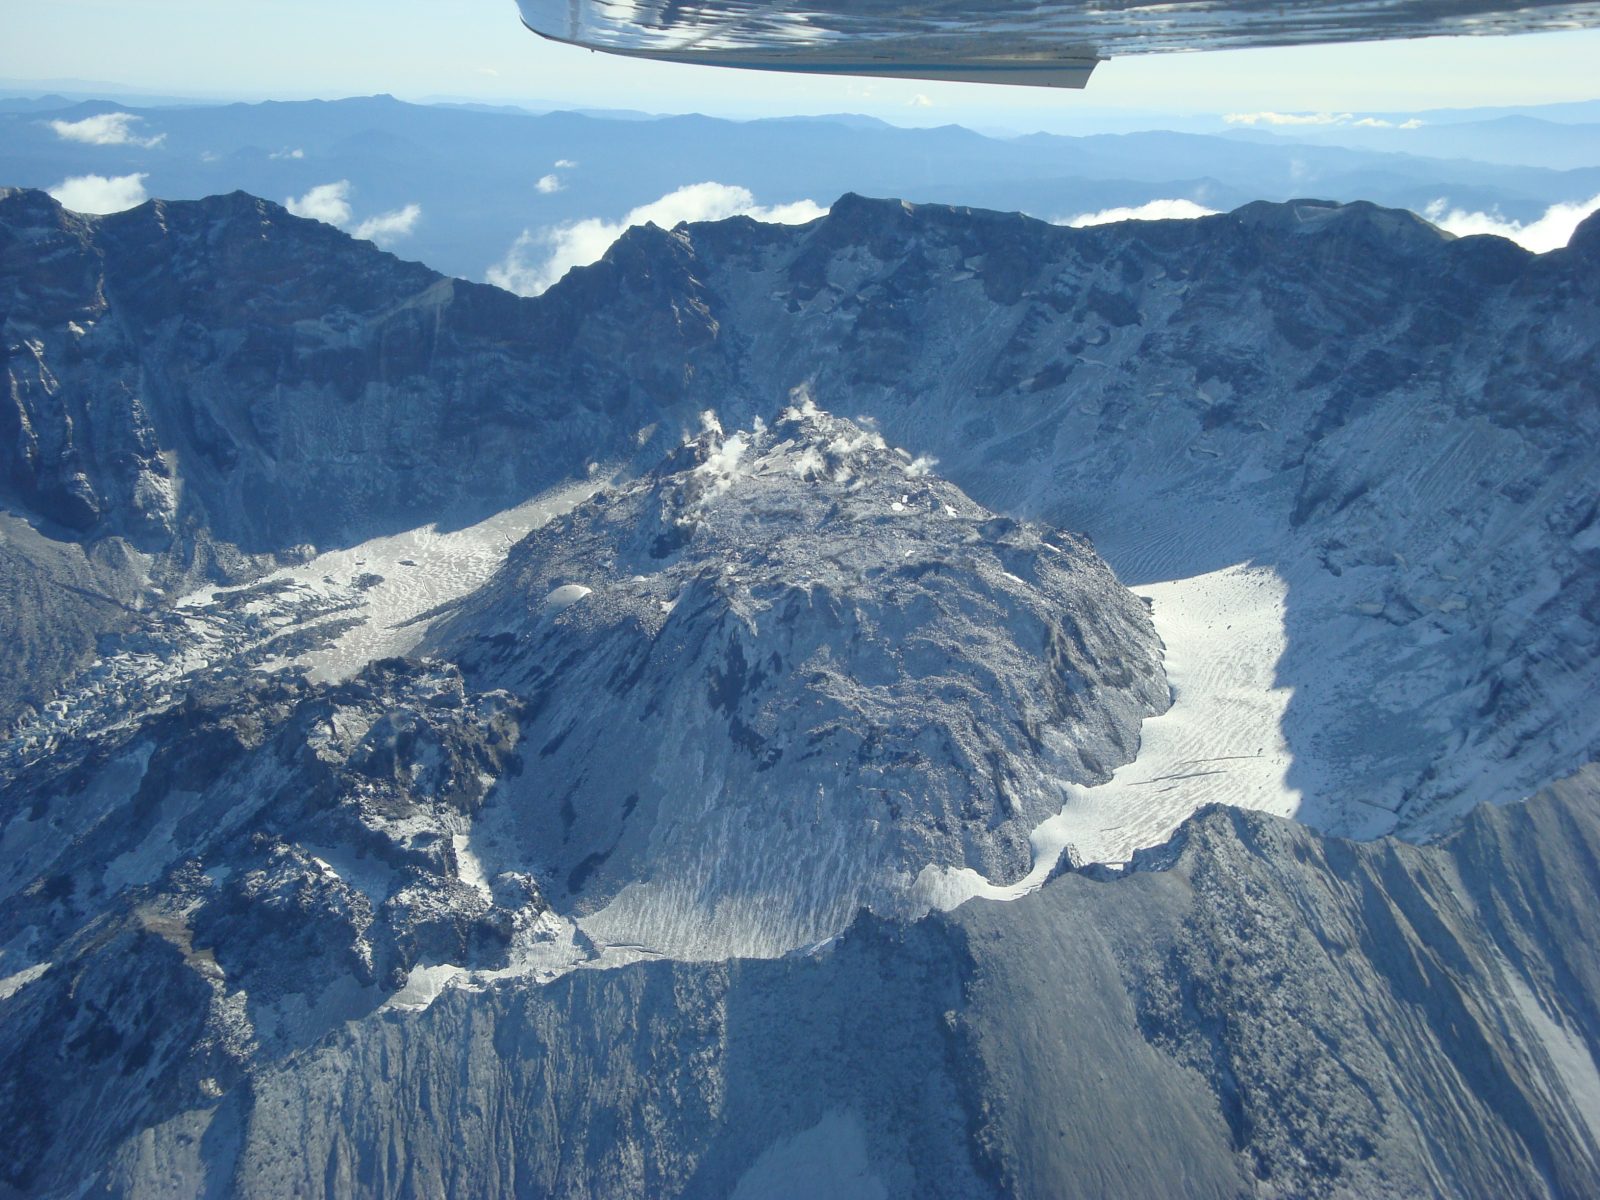 The best way to see Mount St. Helens for the first time is by flying over it!